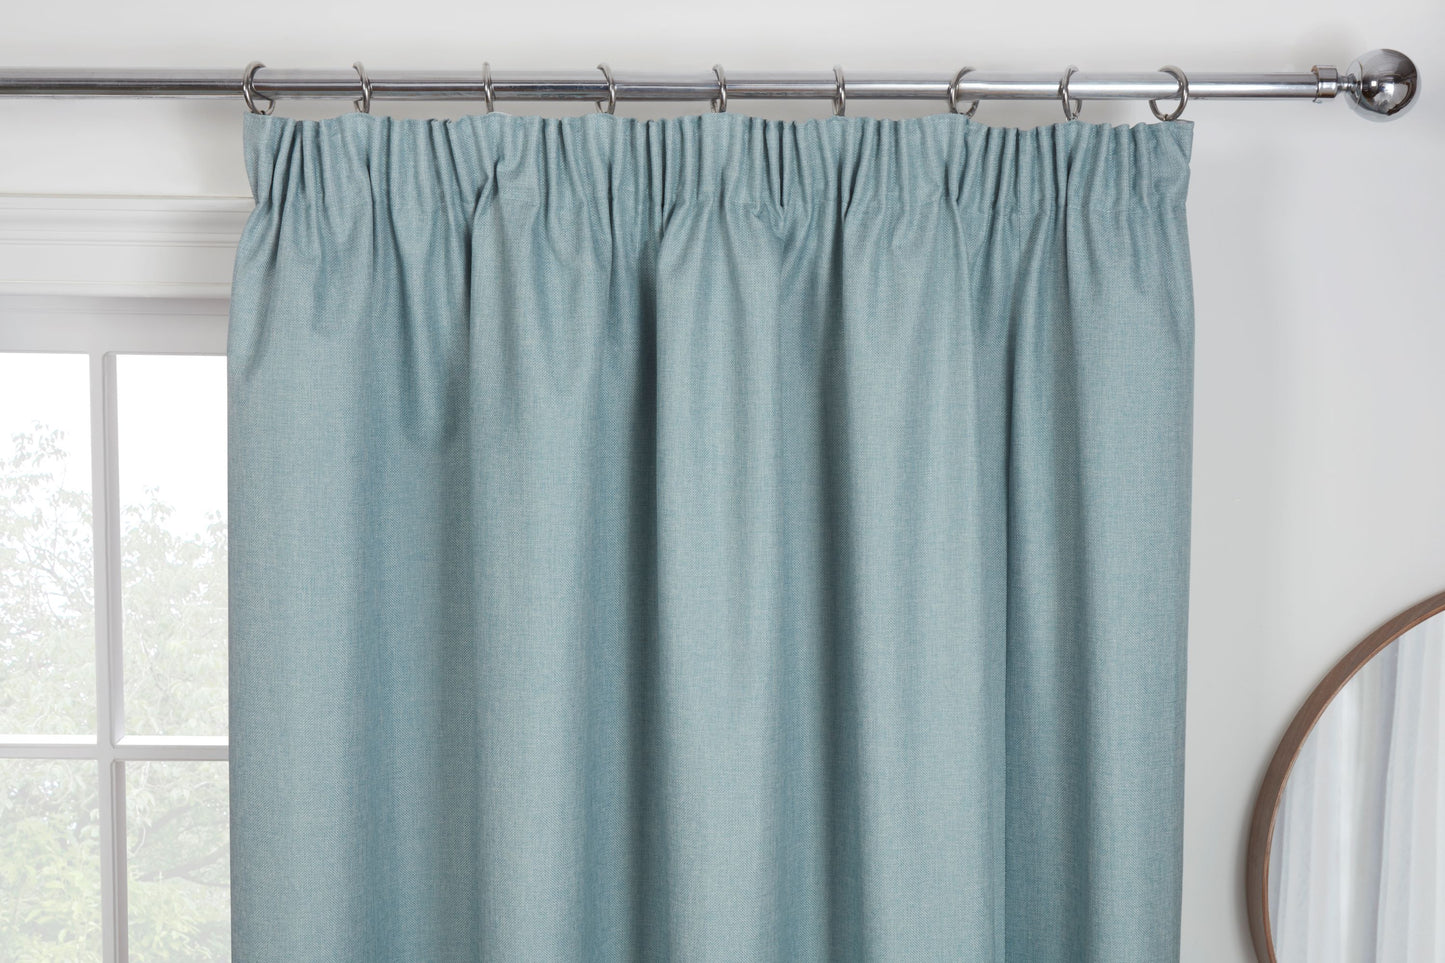 Blackout Curtains in Duck Egg